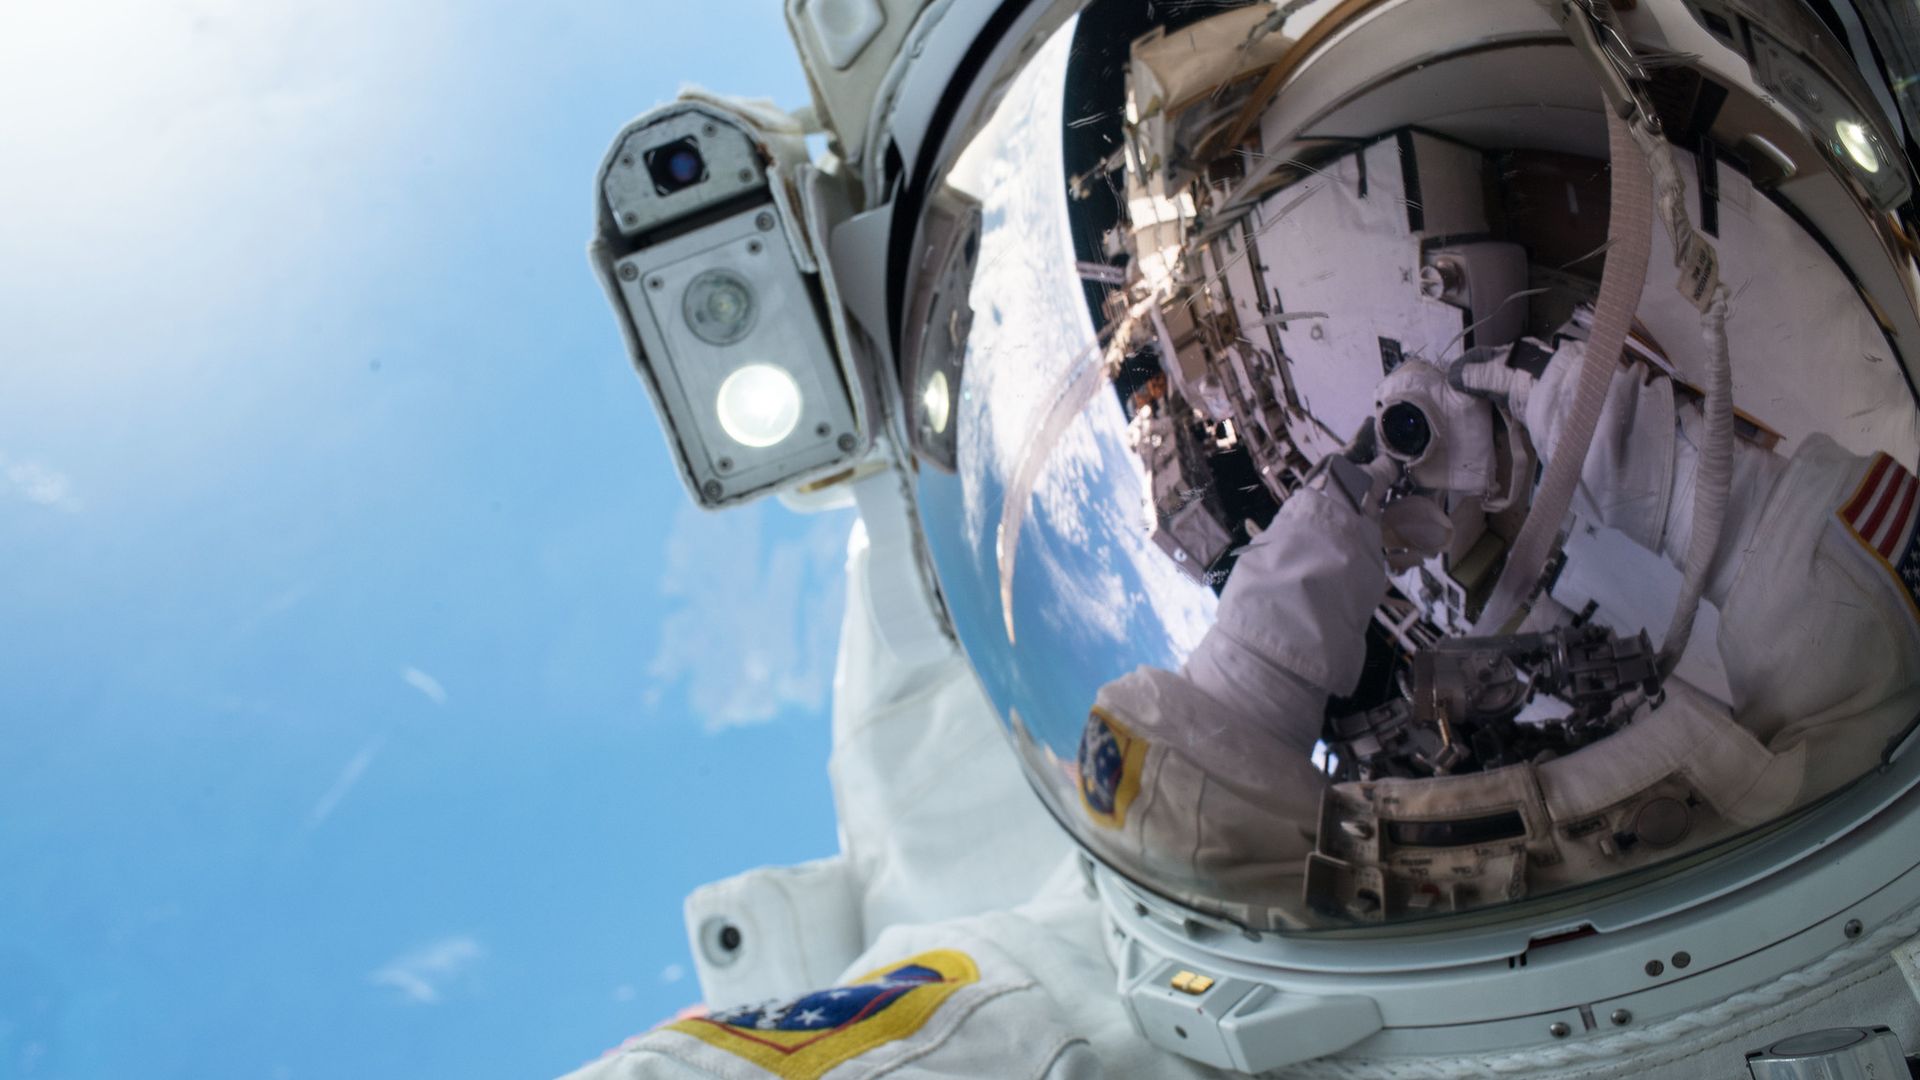 An astronaut selfie in space with Earth in the background